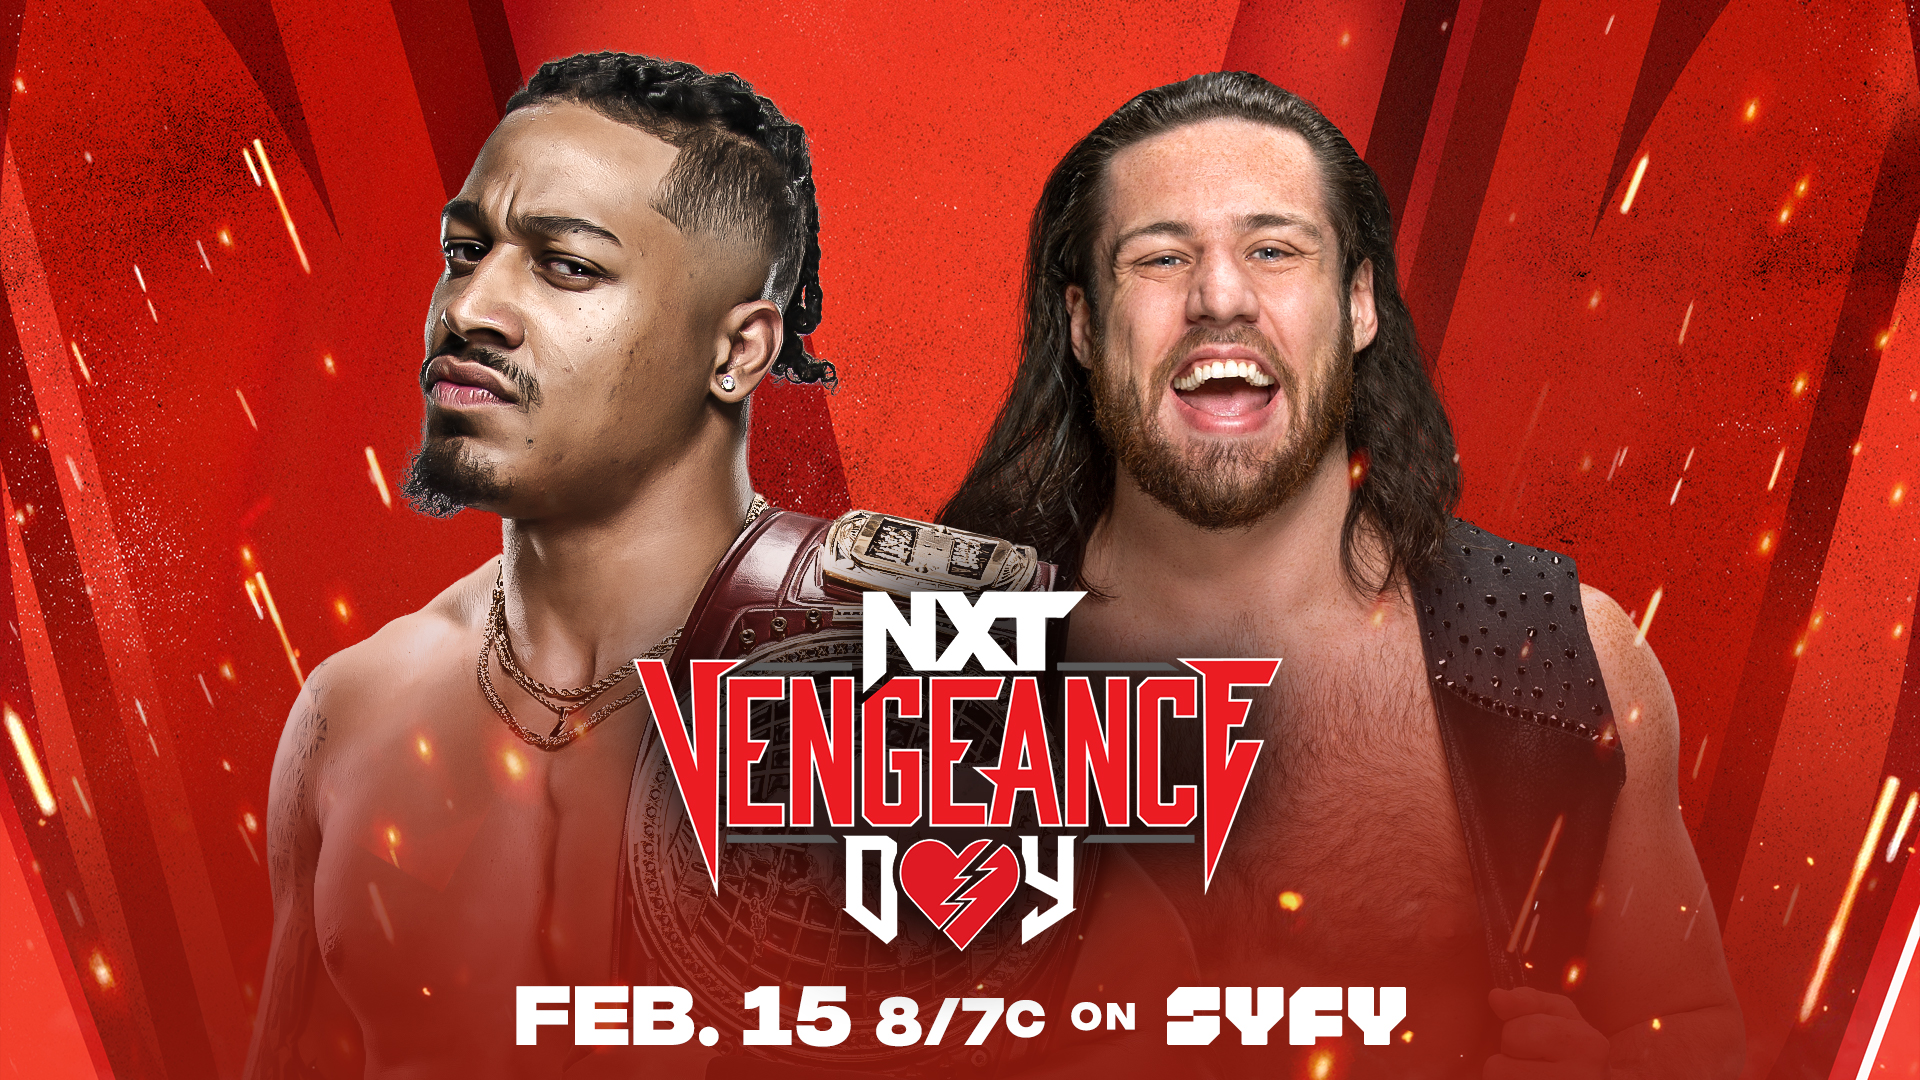 WWE NXT Vengeance Day 2022 Preview: Full Card, Match Predictions &amp; More